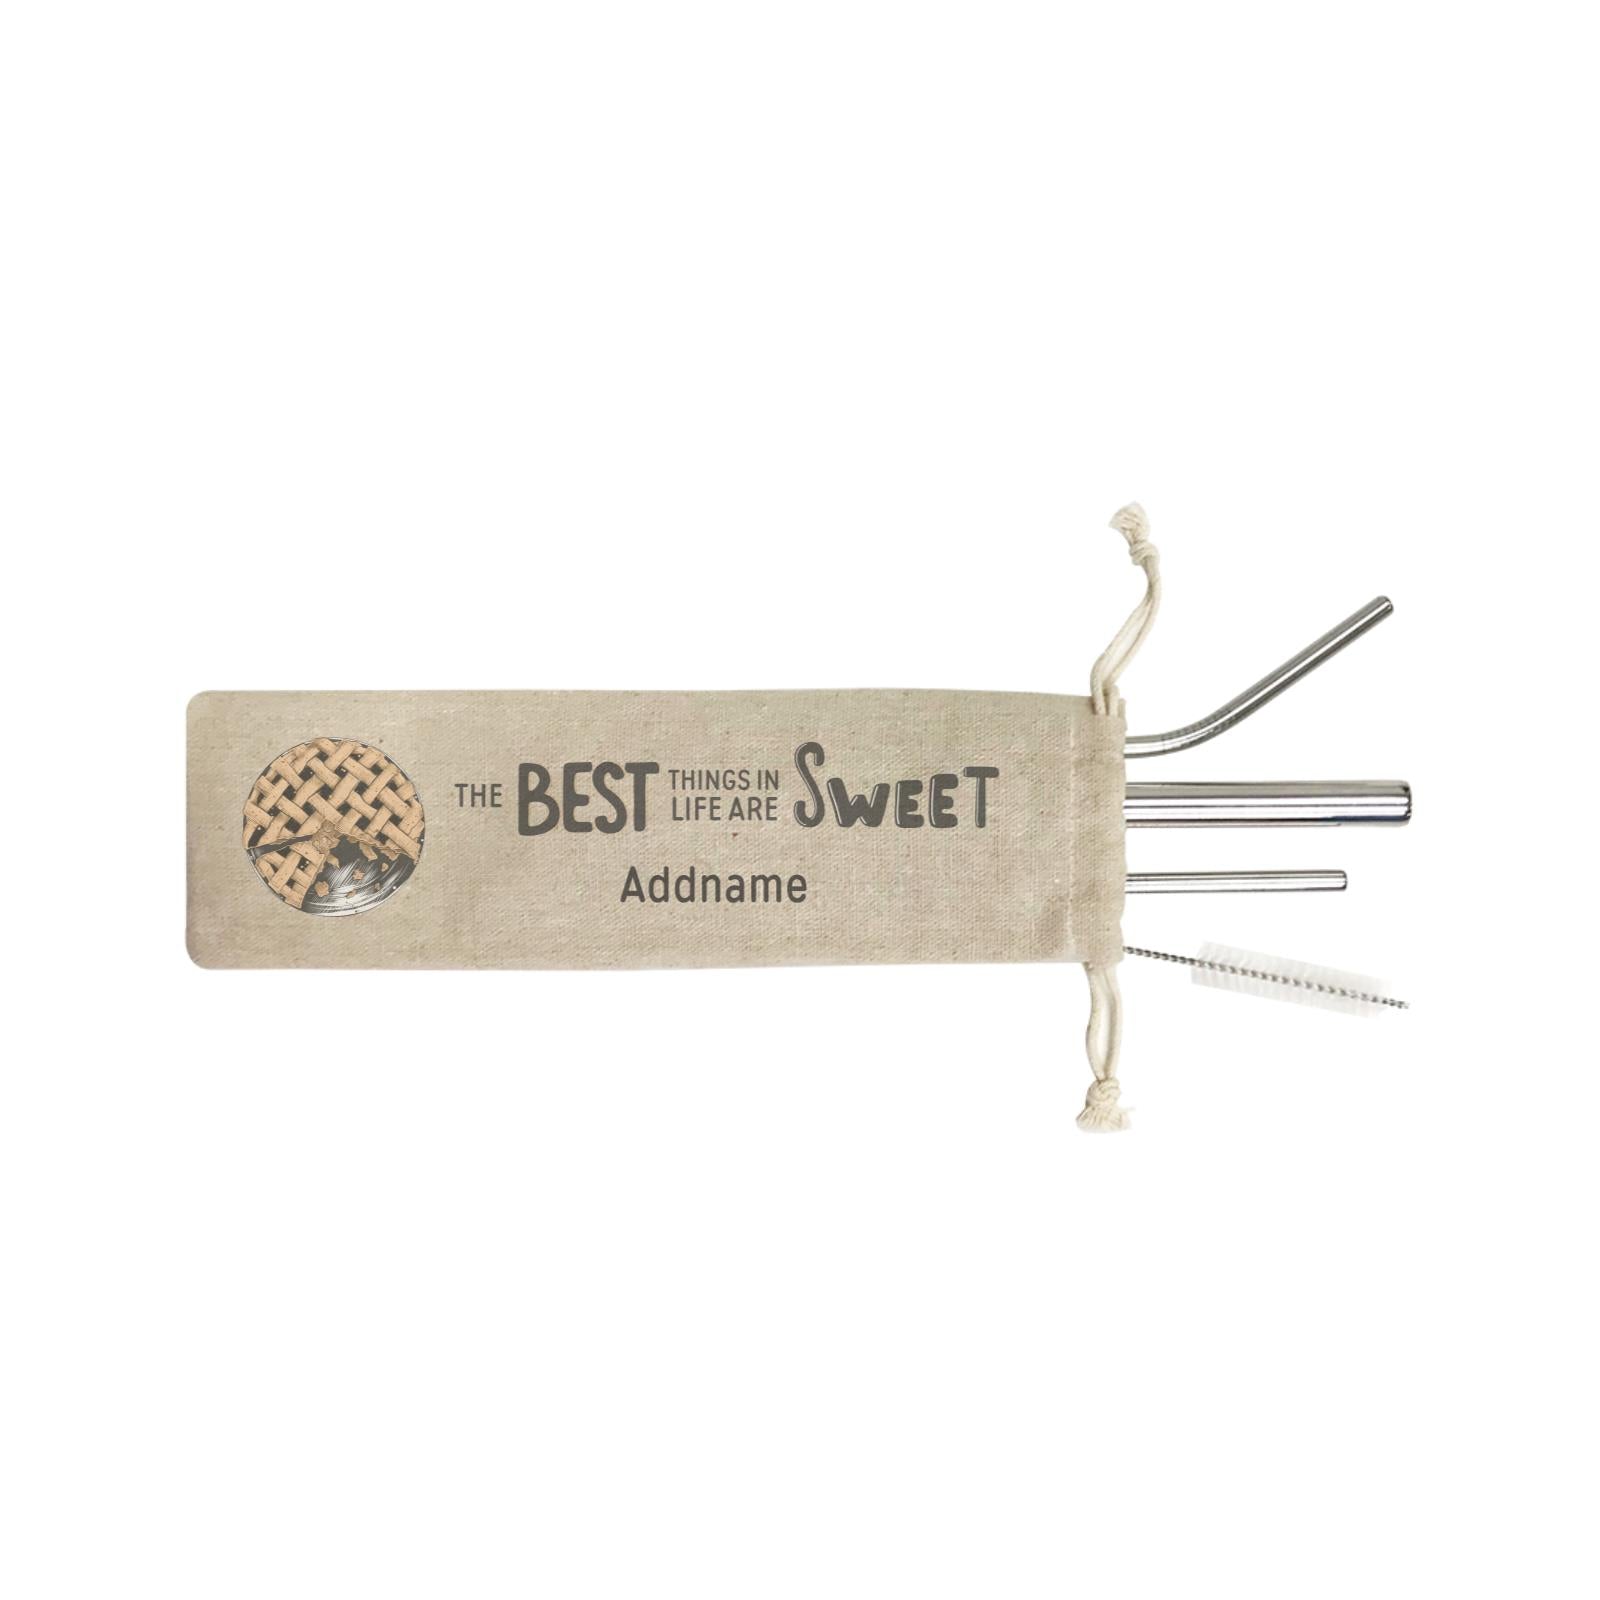 Food Quotes The Best Things In Life Are Sweet Addname SB 4-in-1 Stainless Steel Straw Set In a Satchel